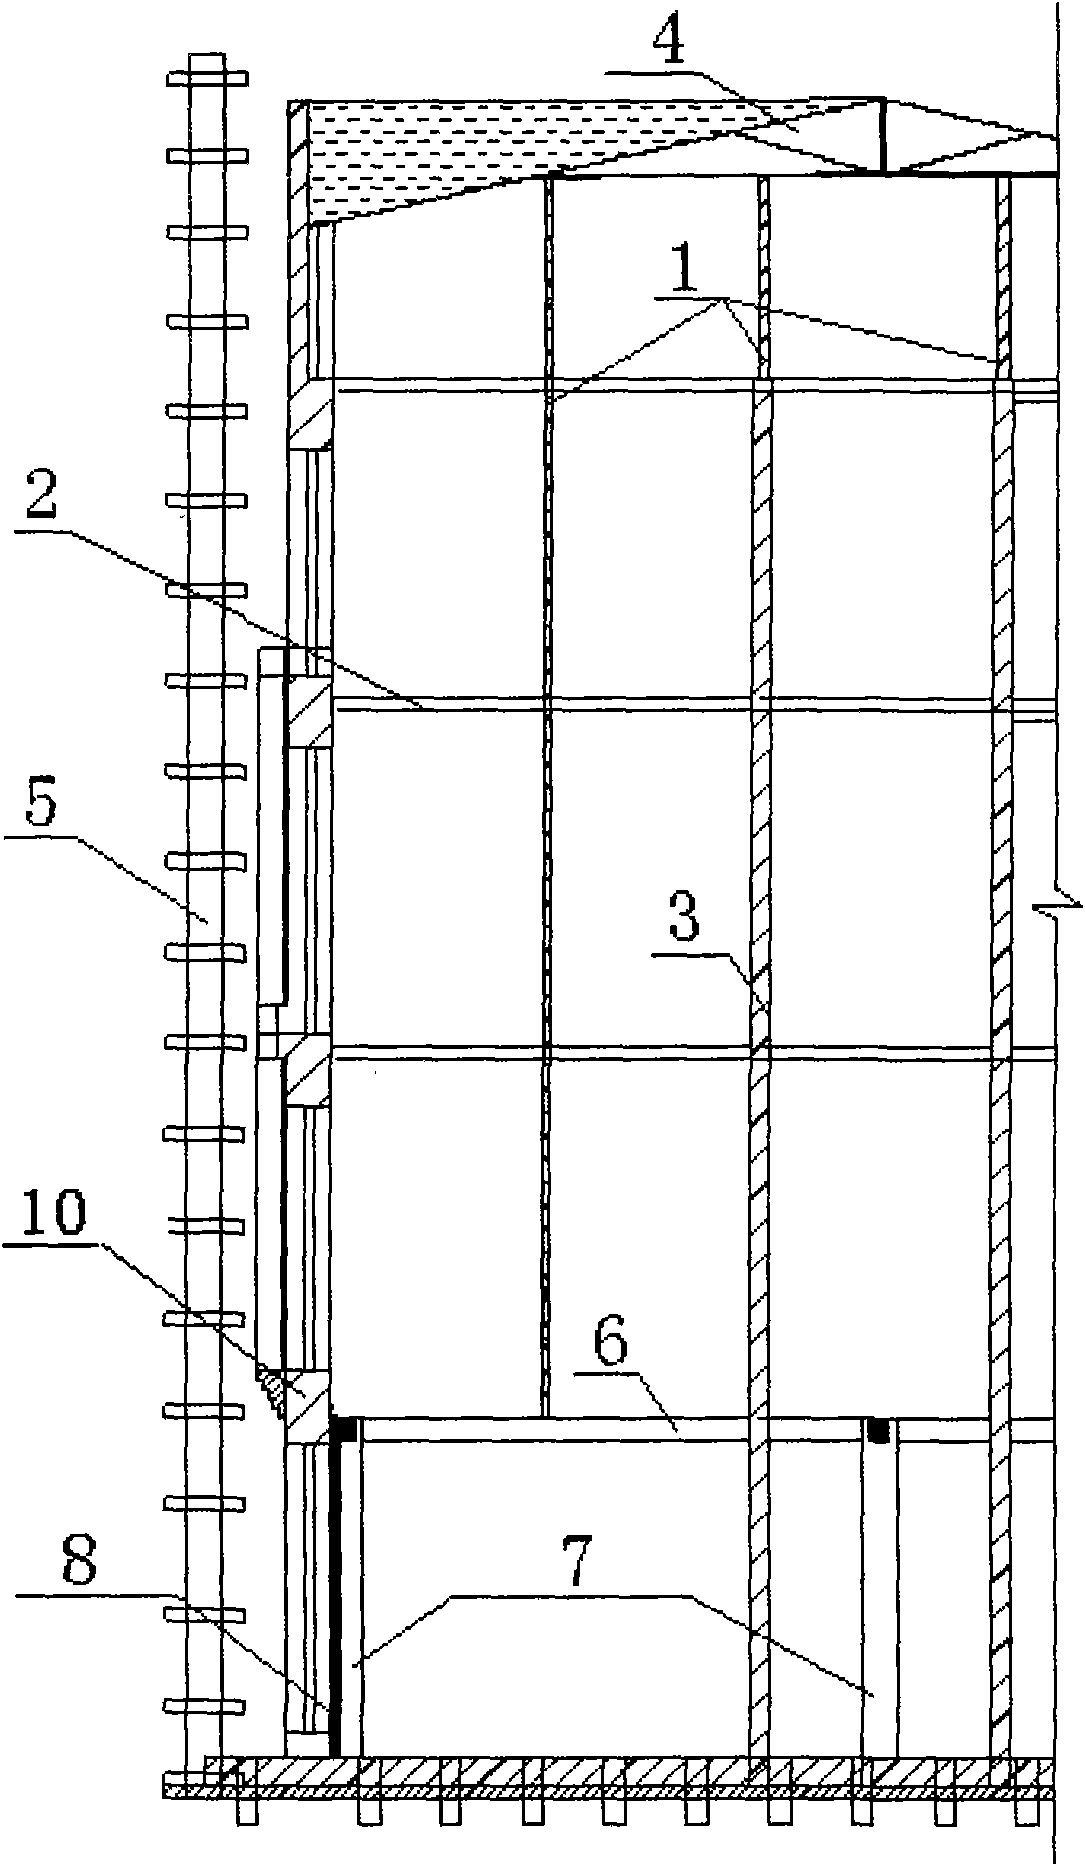 Construction method of whole reverse replacement of structure